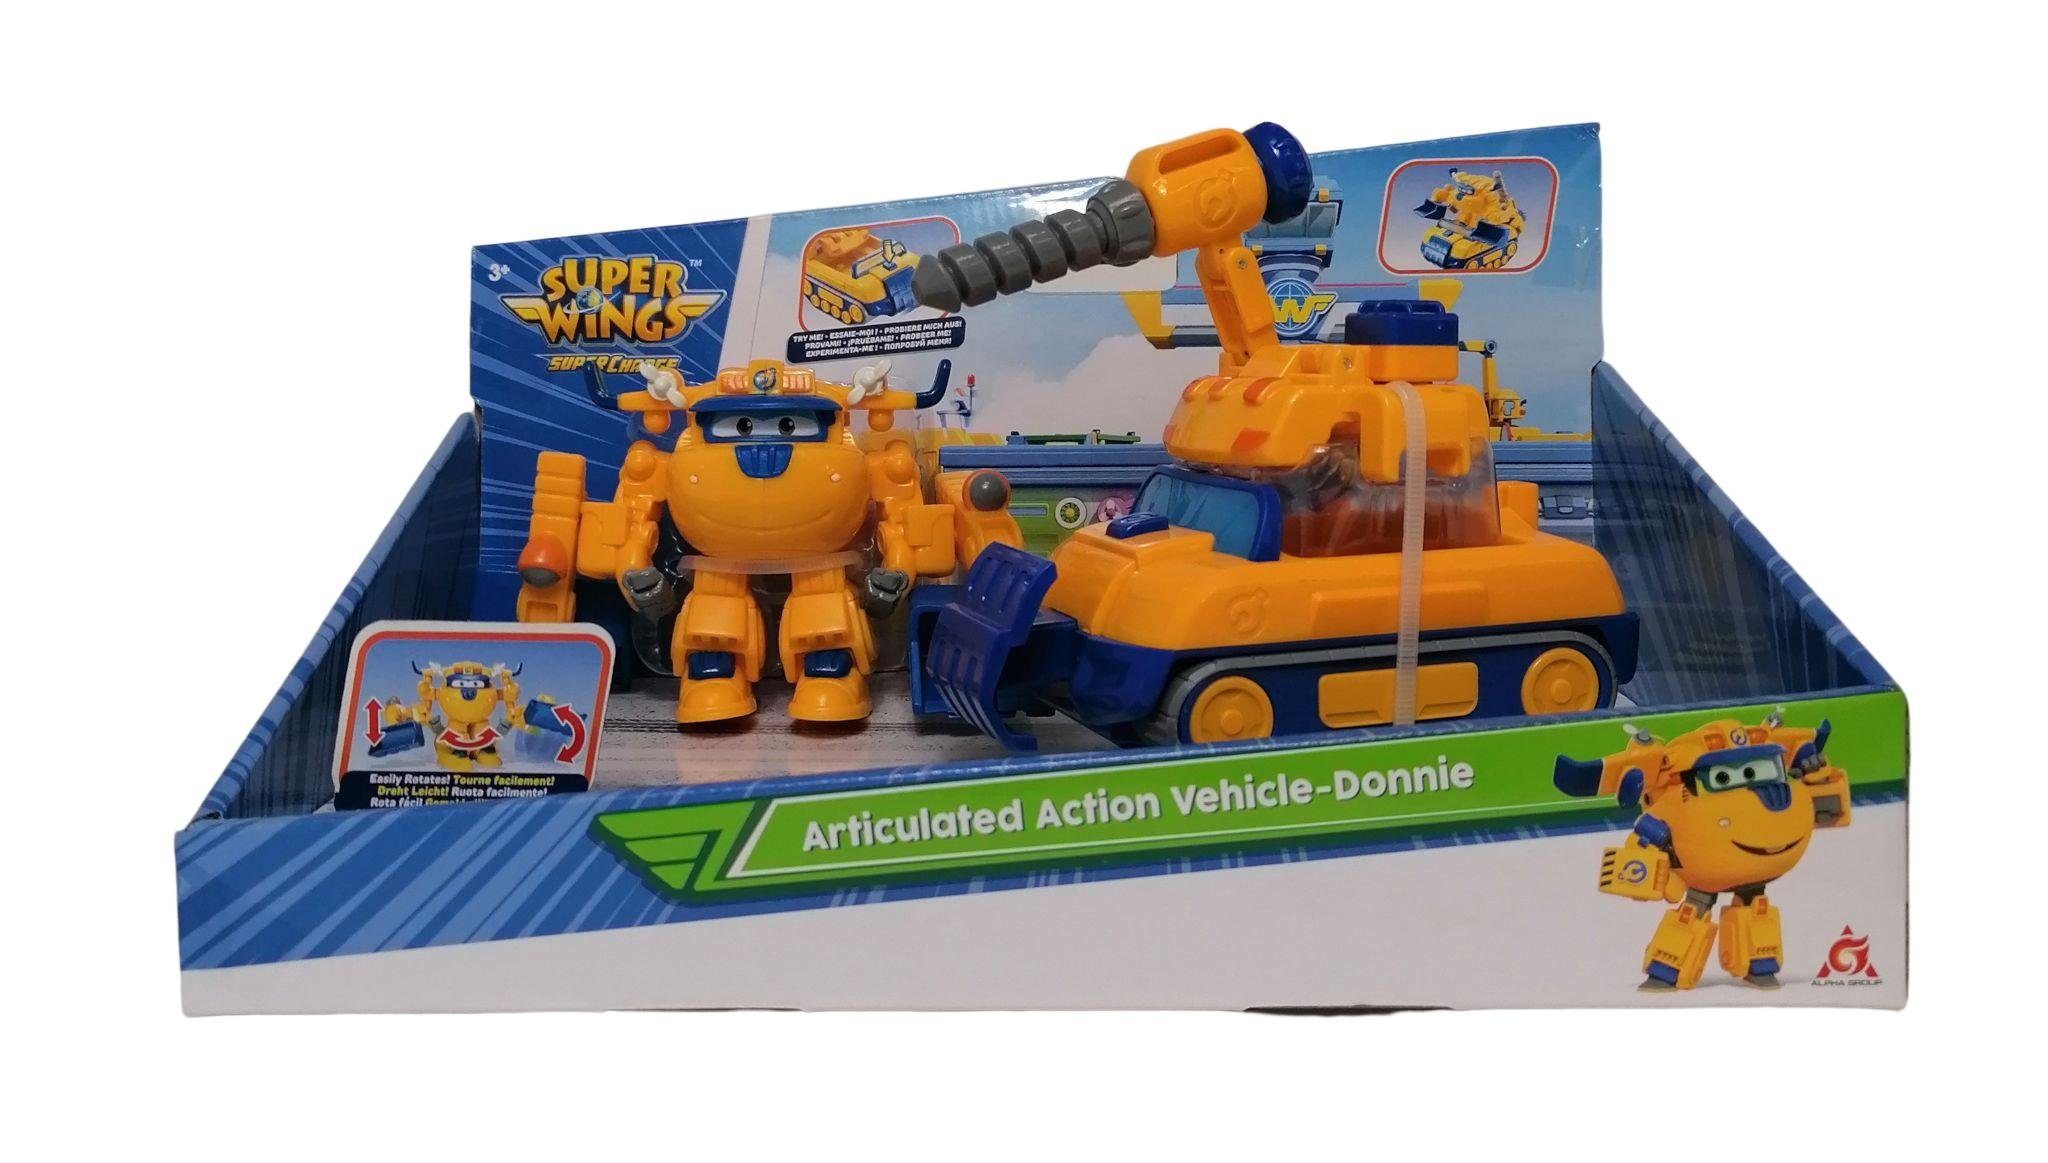 Vehicle-Donnie, Vago®-Toys Action VaGo-Tools (Stück) Super Wings Actionfigur Articulated